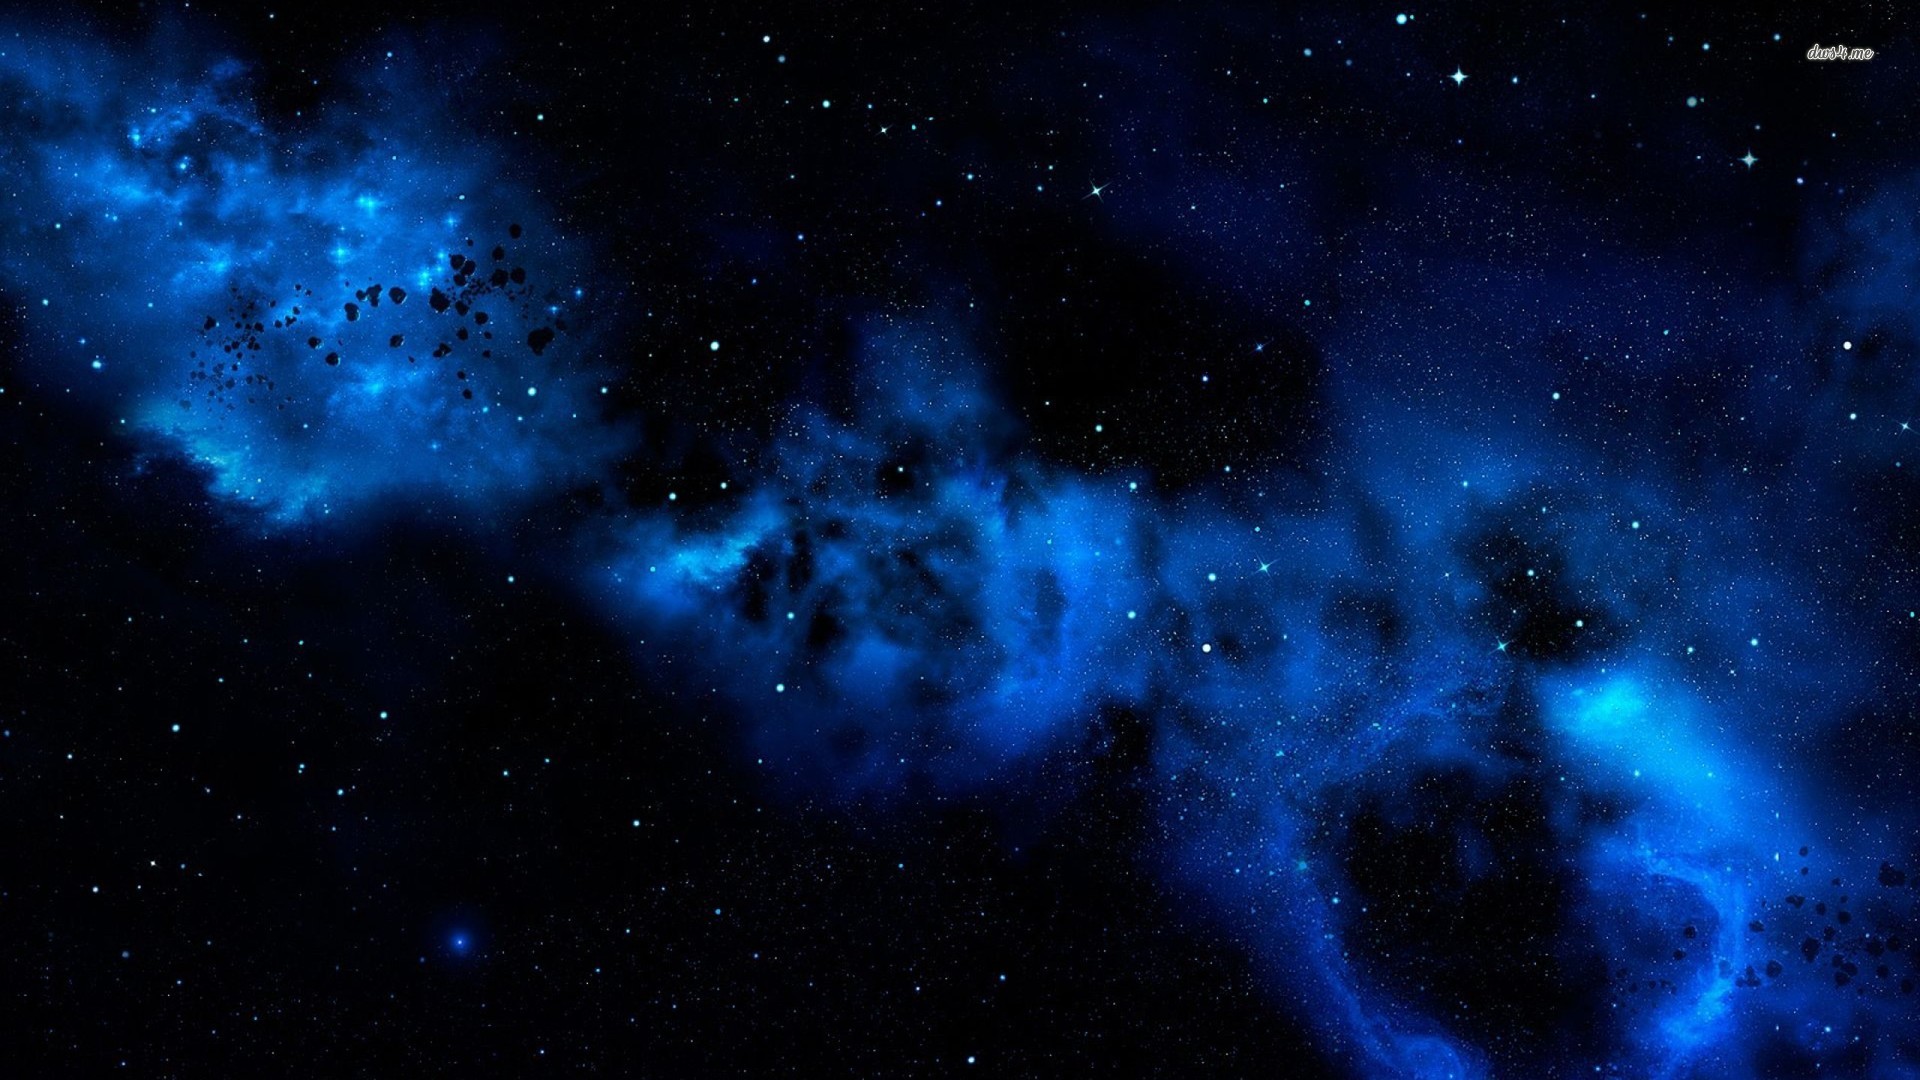 Free download Dark blue galaxy wallpaper Space wallpapers 47338 [1920x1080] for your Desktop